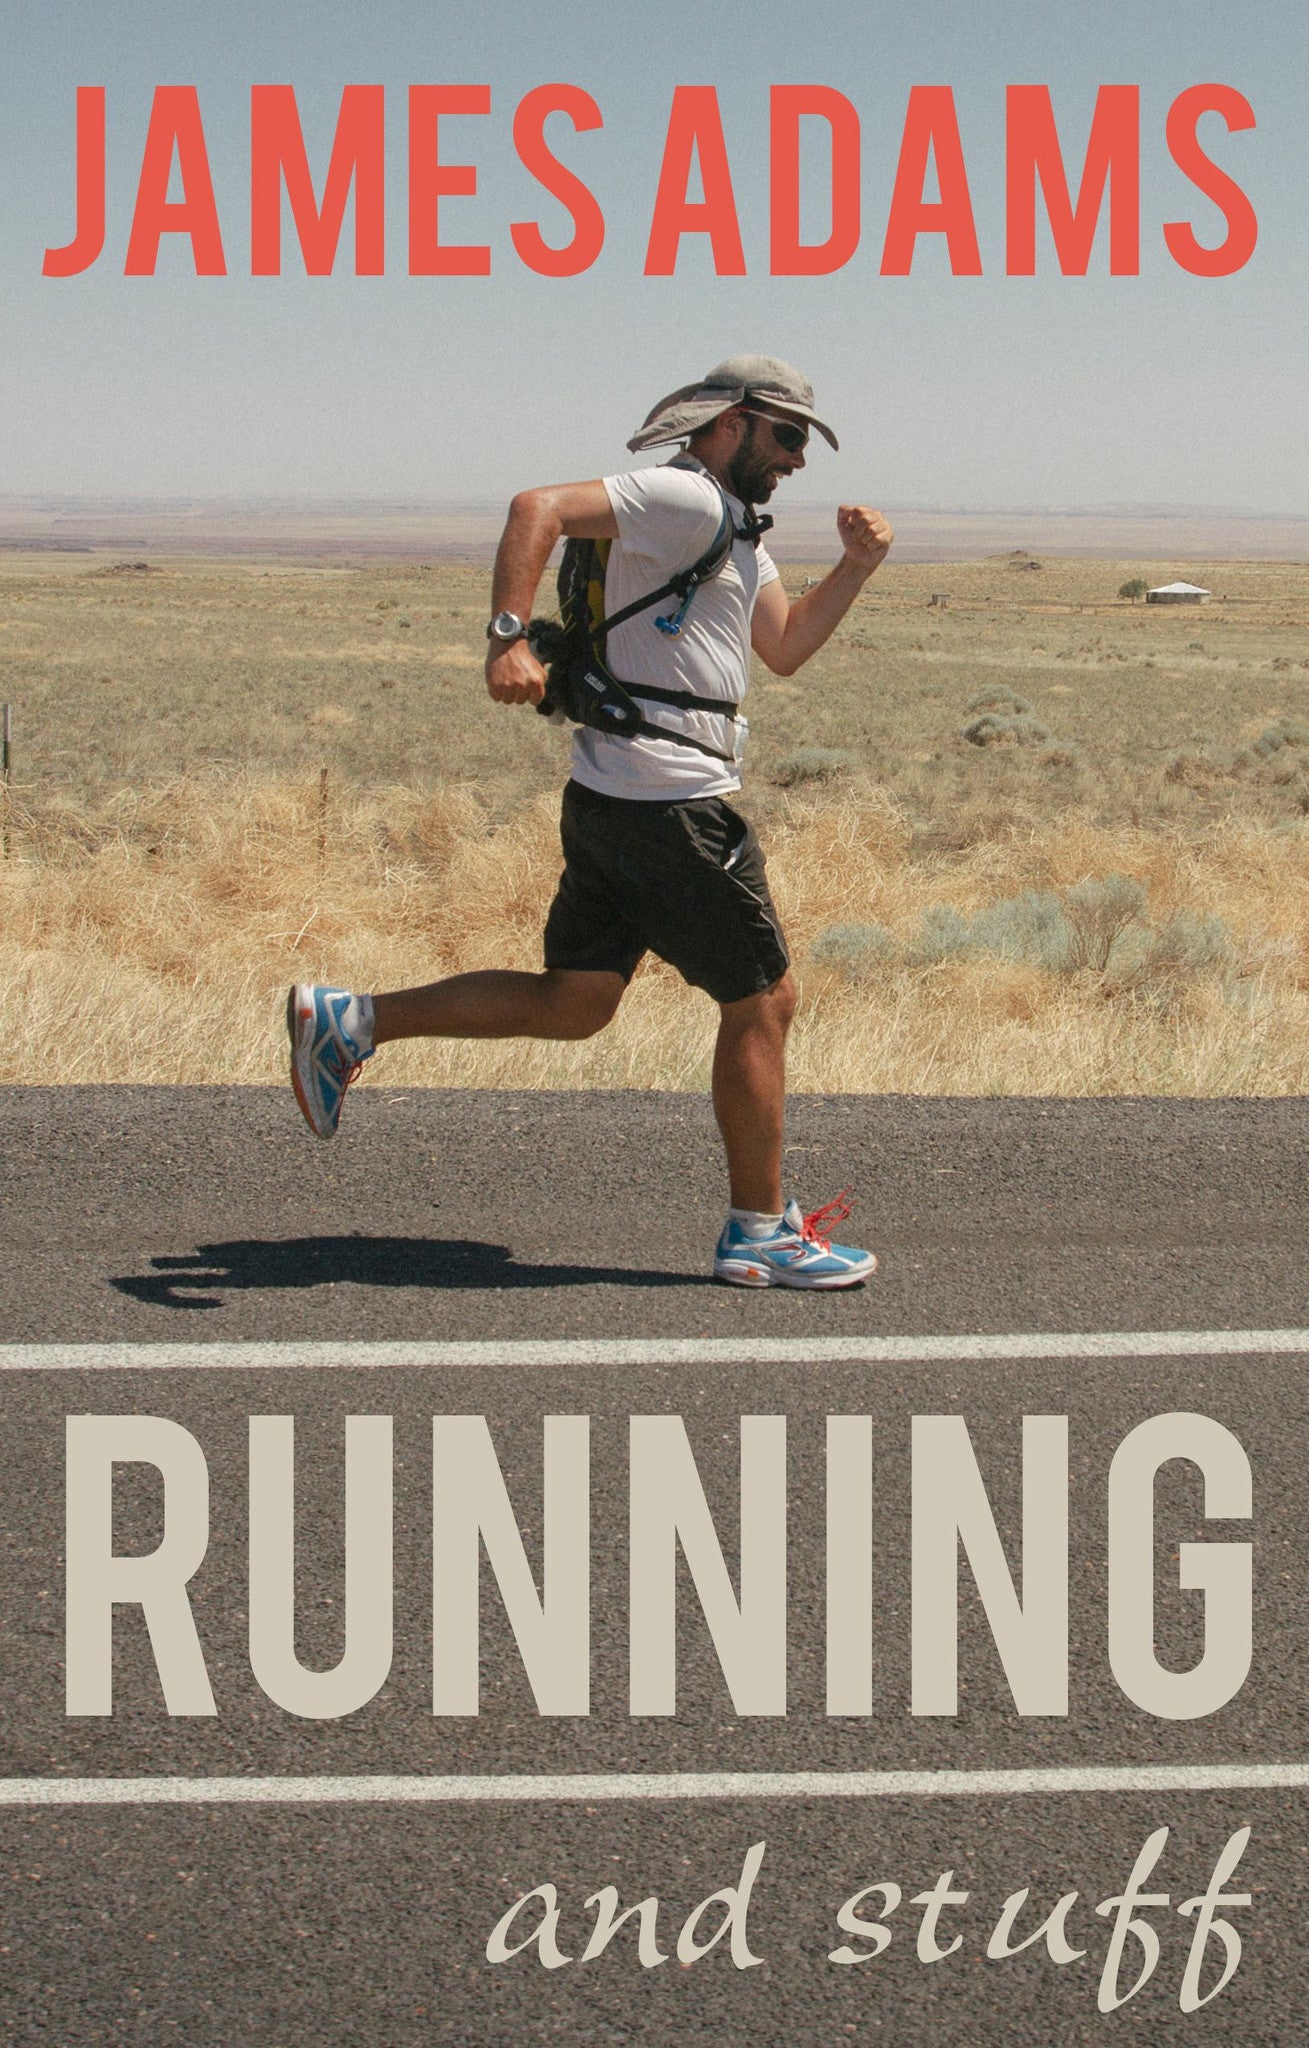 Running And Stuff: A Book by James Adams